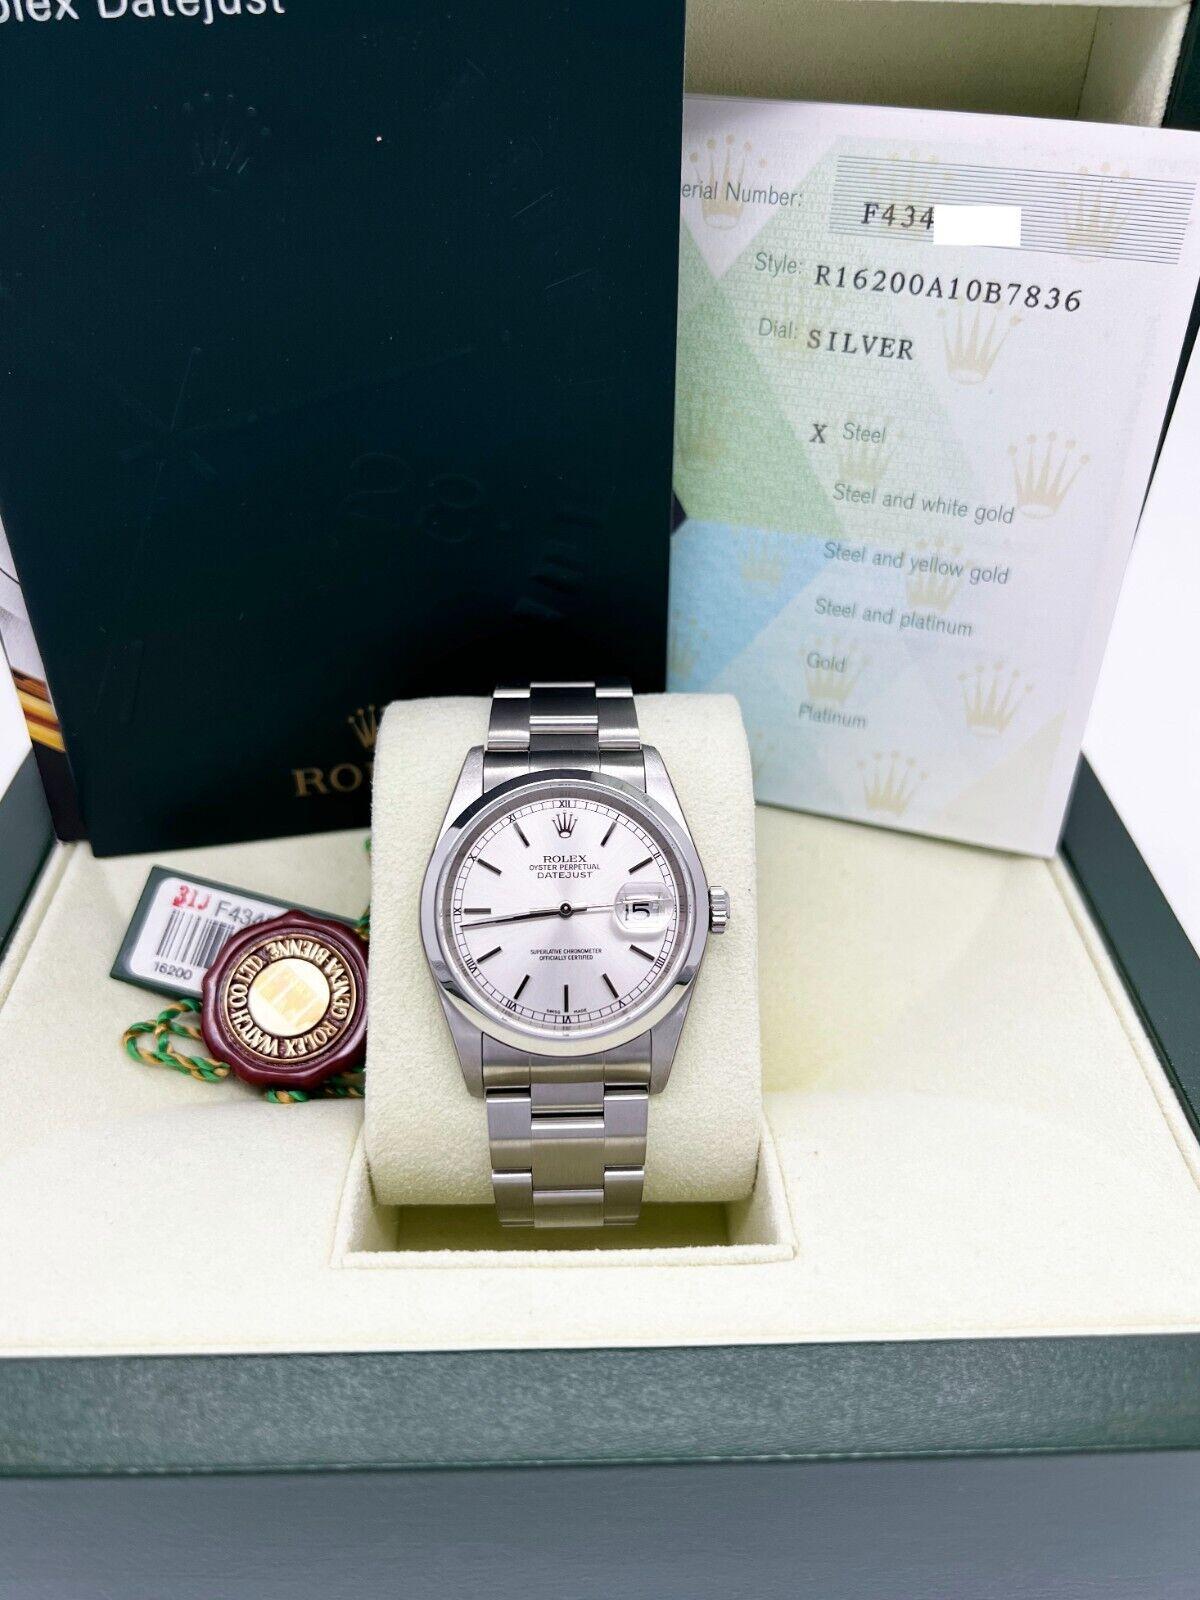 Rolex Datejust 16200 Silver Dial Stainless Steel Box Paper 2005 In Excellent Condition For Sale In San Diego, CA